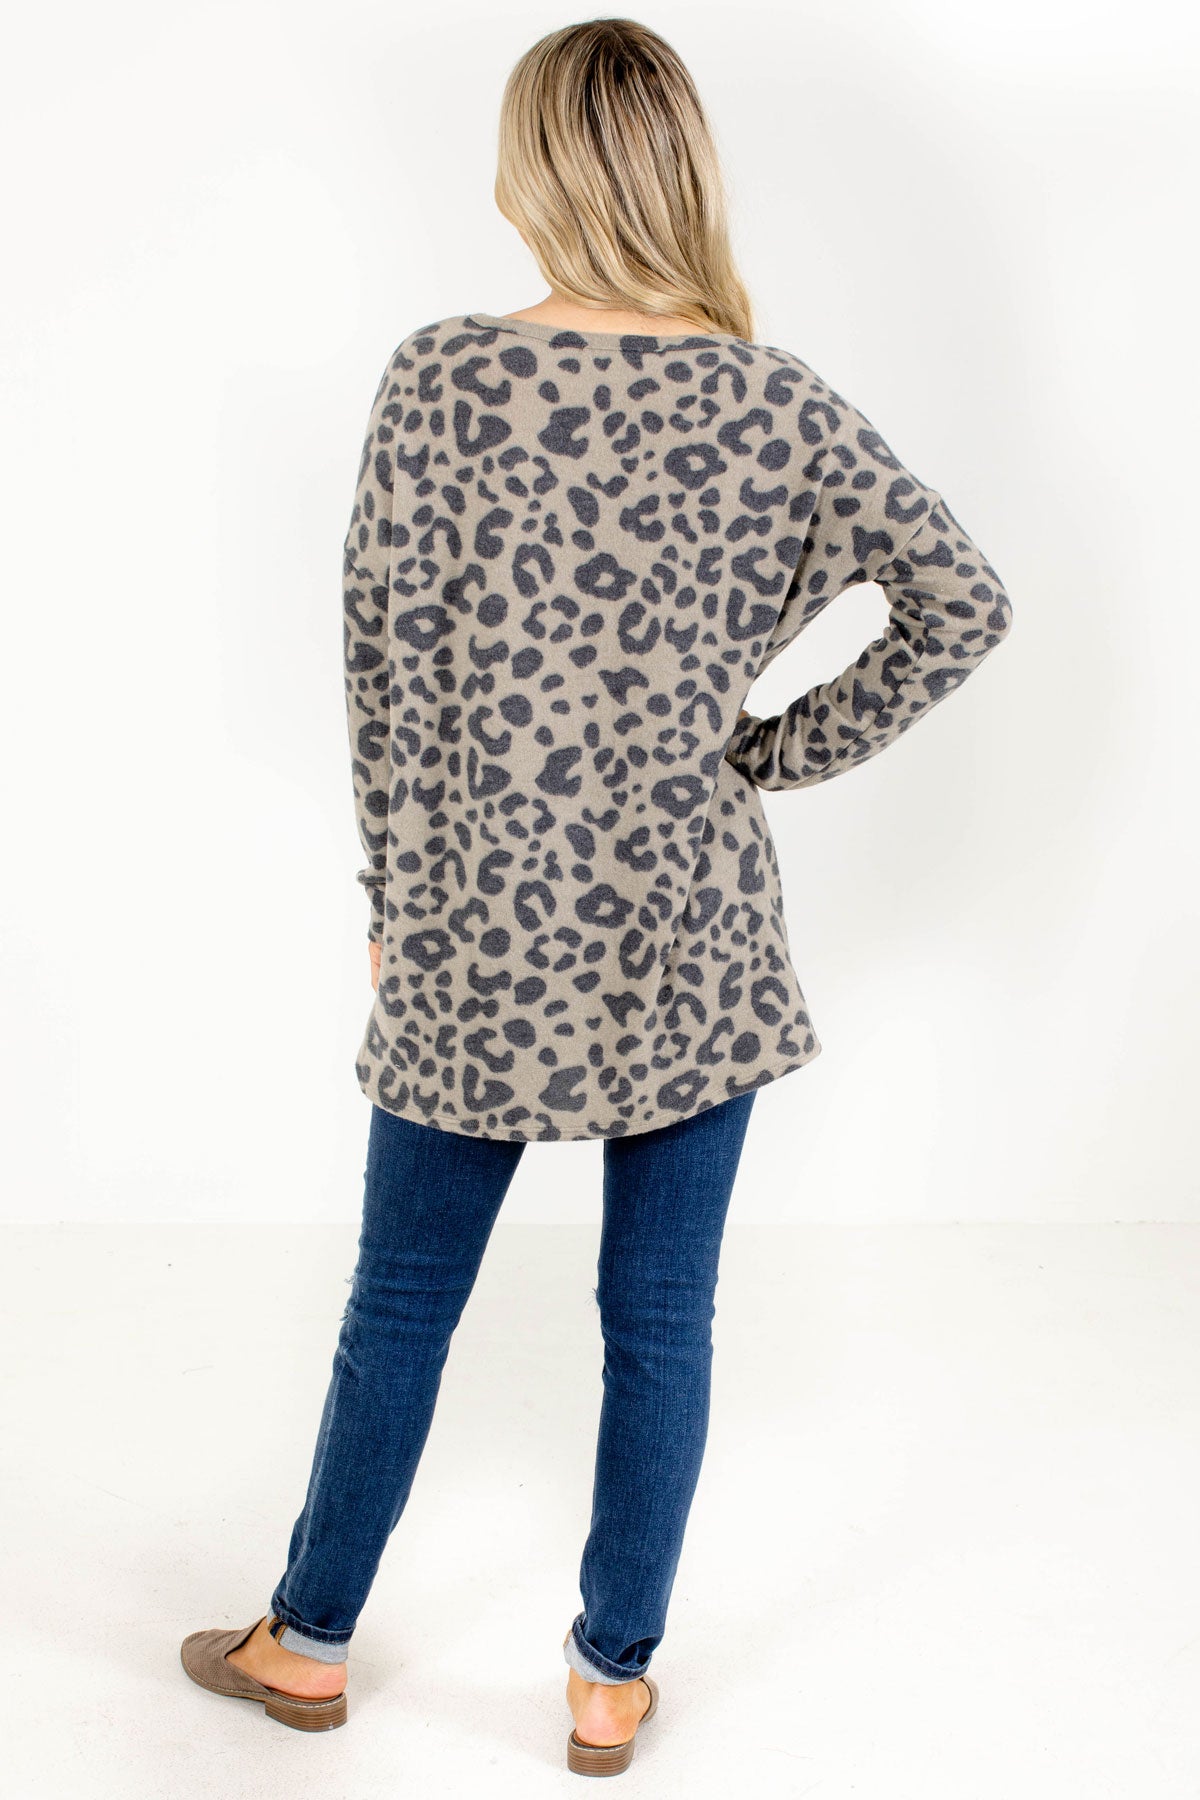 Women's Oversized Long Sleeve Top with Leopard Print